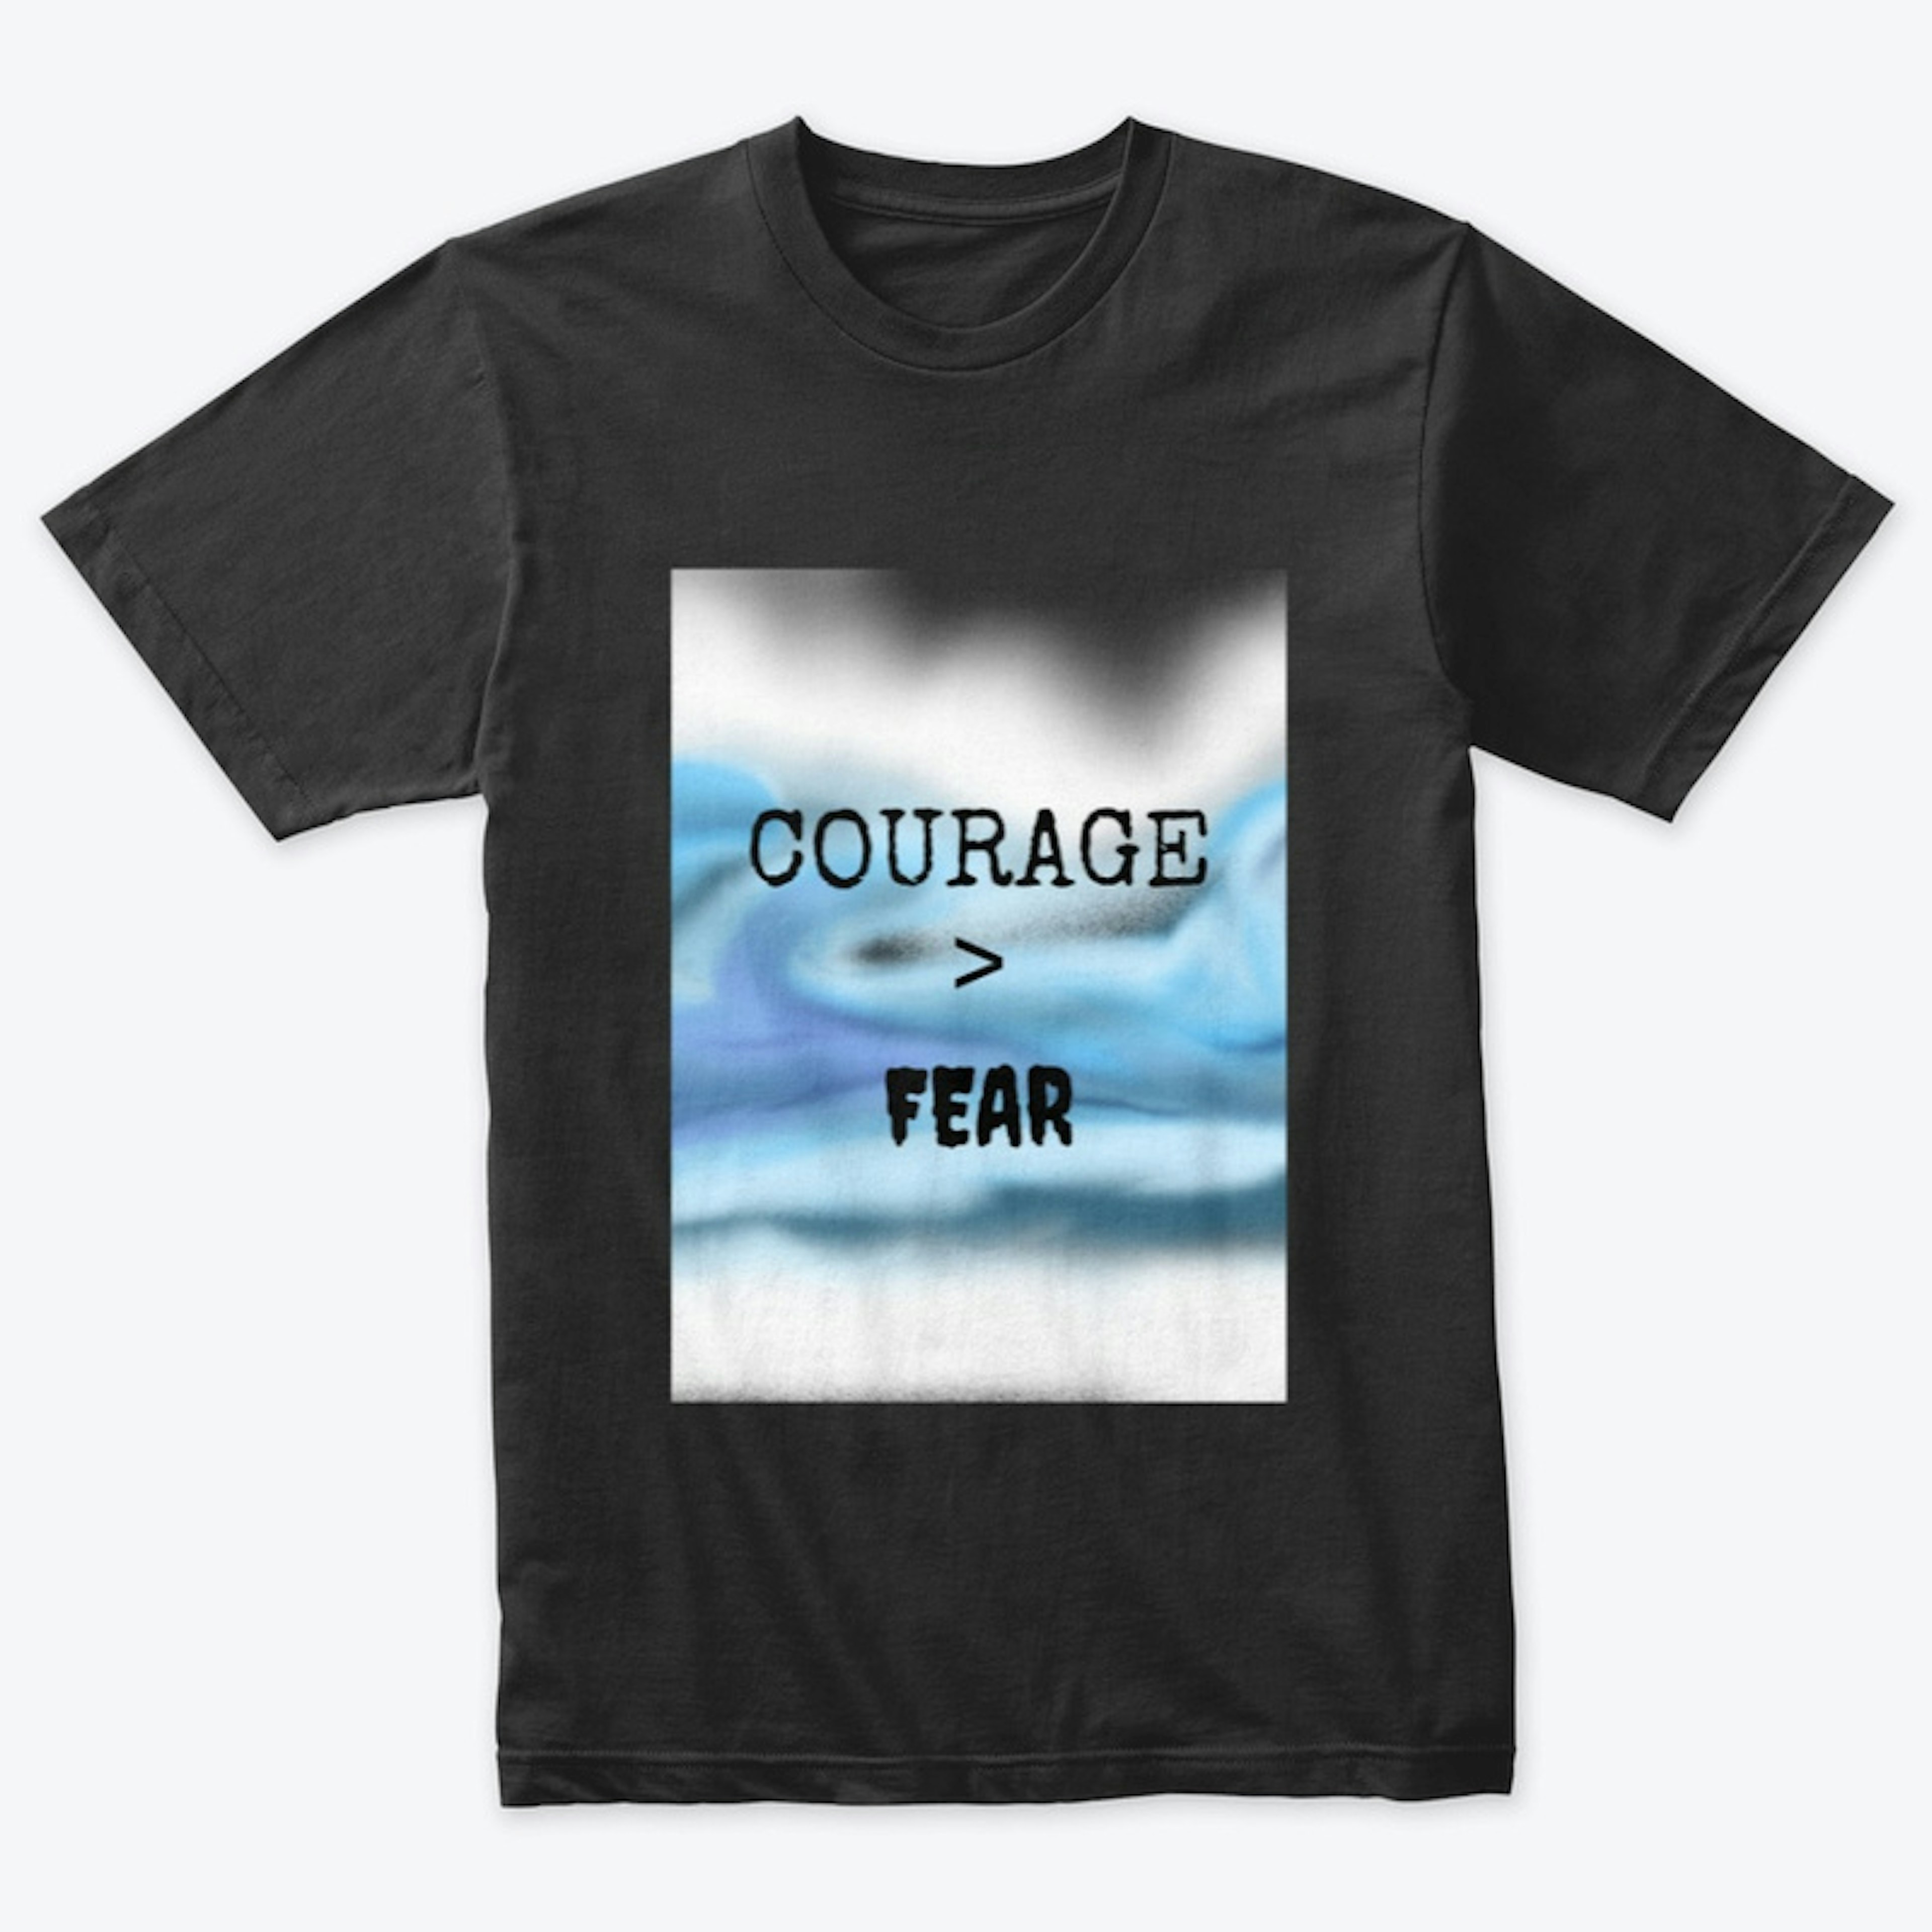 Courage is greater-2021 Scholarship